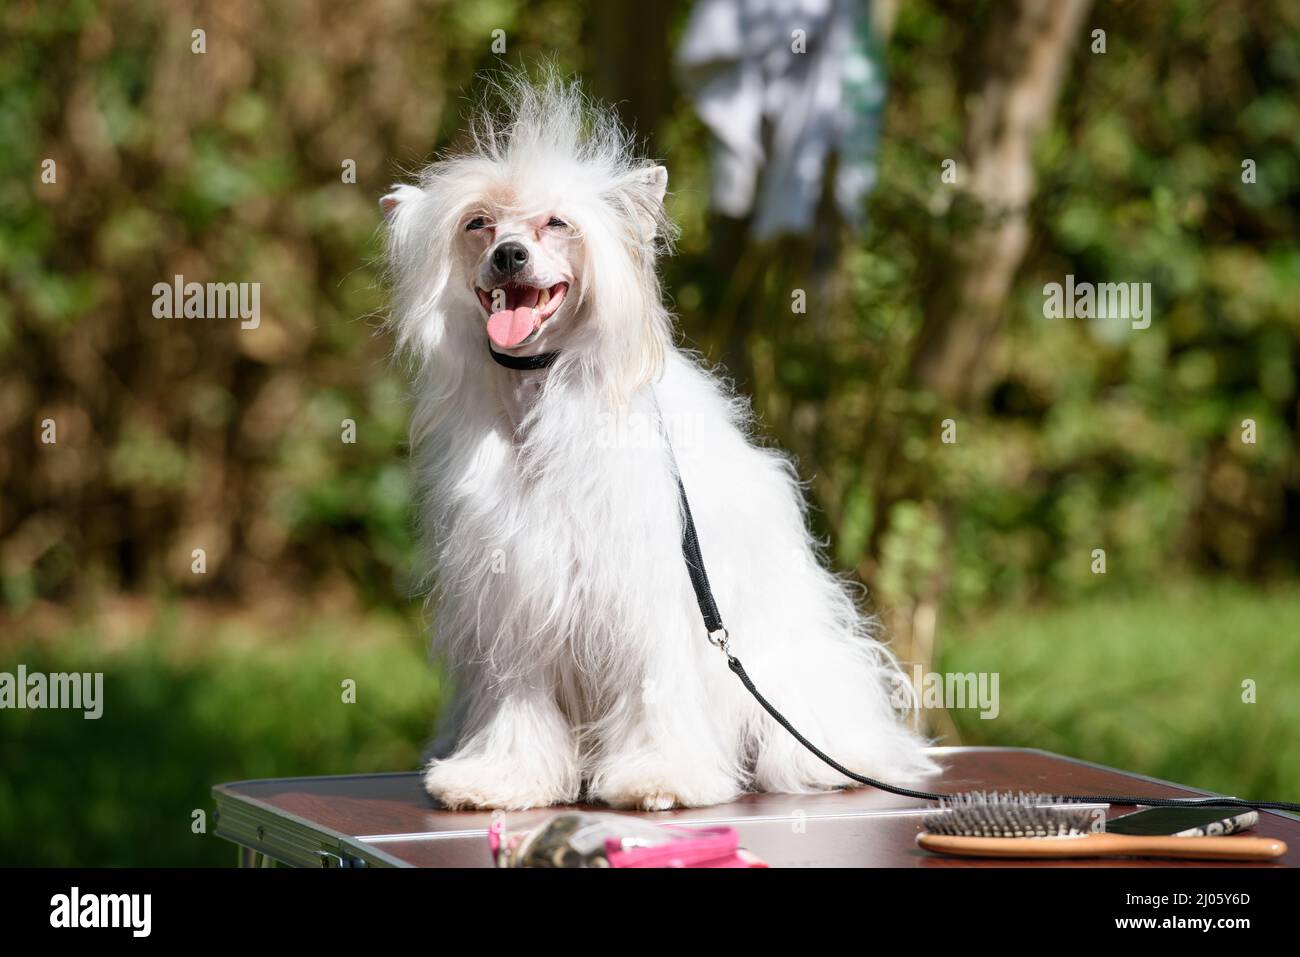 A Chinese Crested Powder Puff dog sits on a table standing outside against the backdrop of trees. Stock Photo